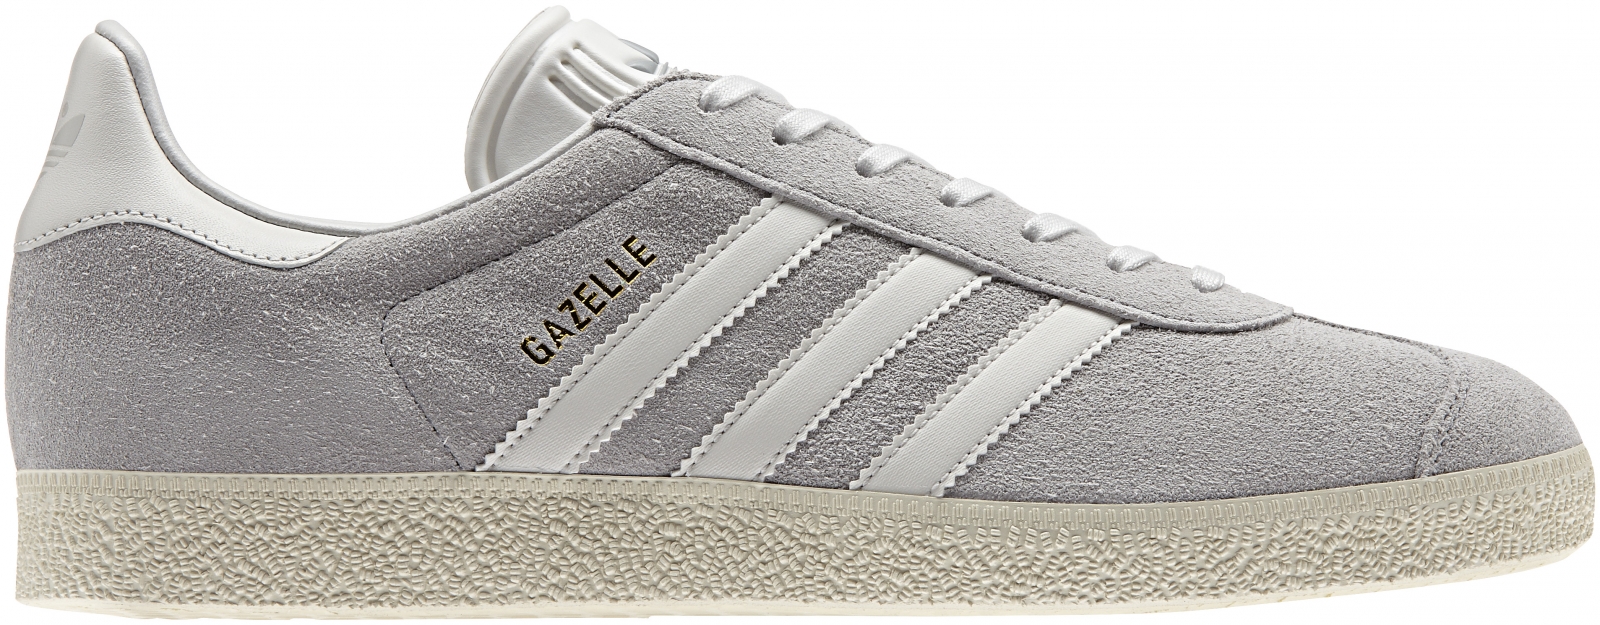 Adidas Gazelle Relaunch Classic Terrace Shoe Revived In Time For Euro 2016